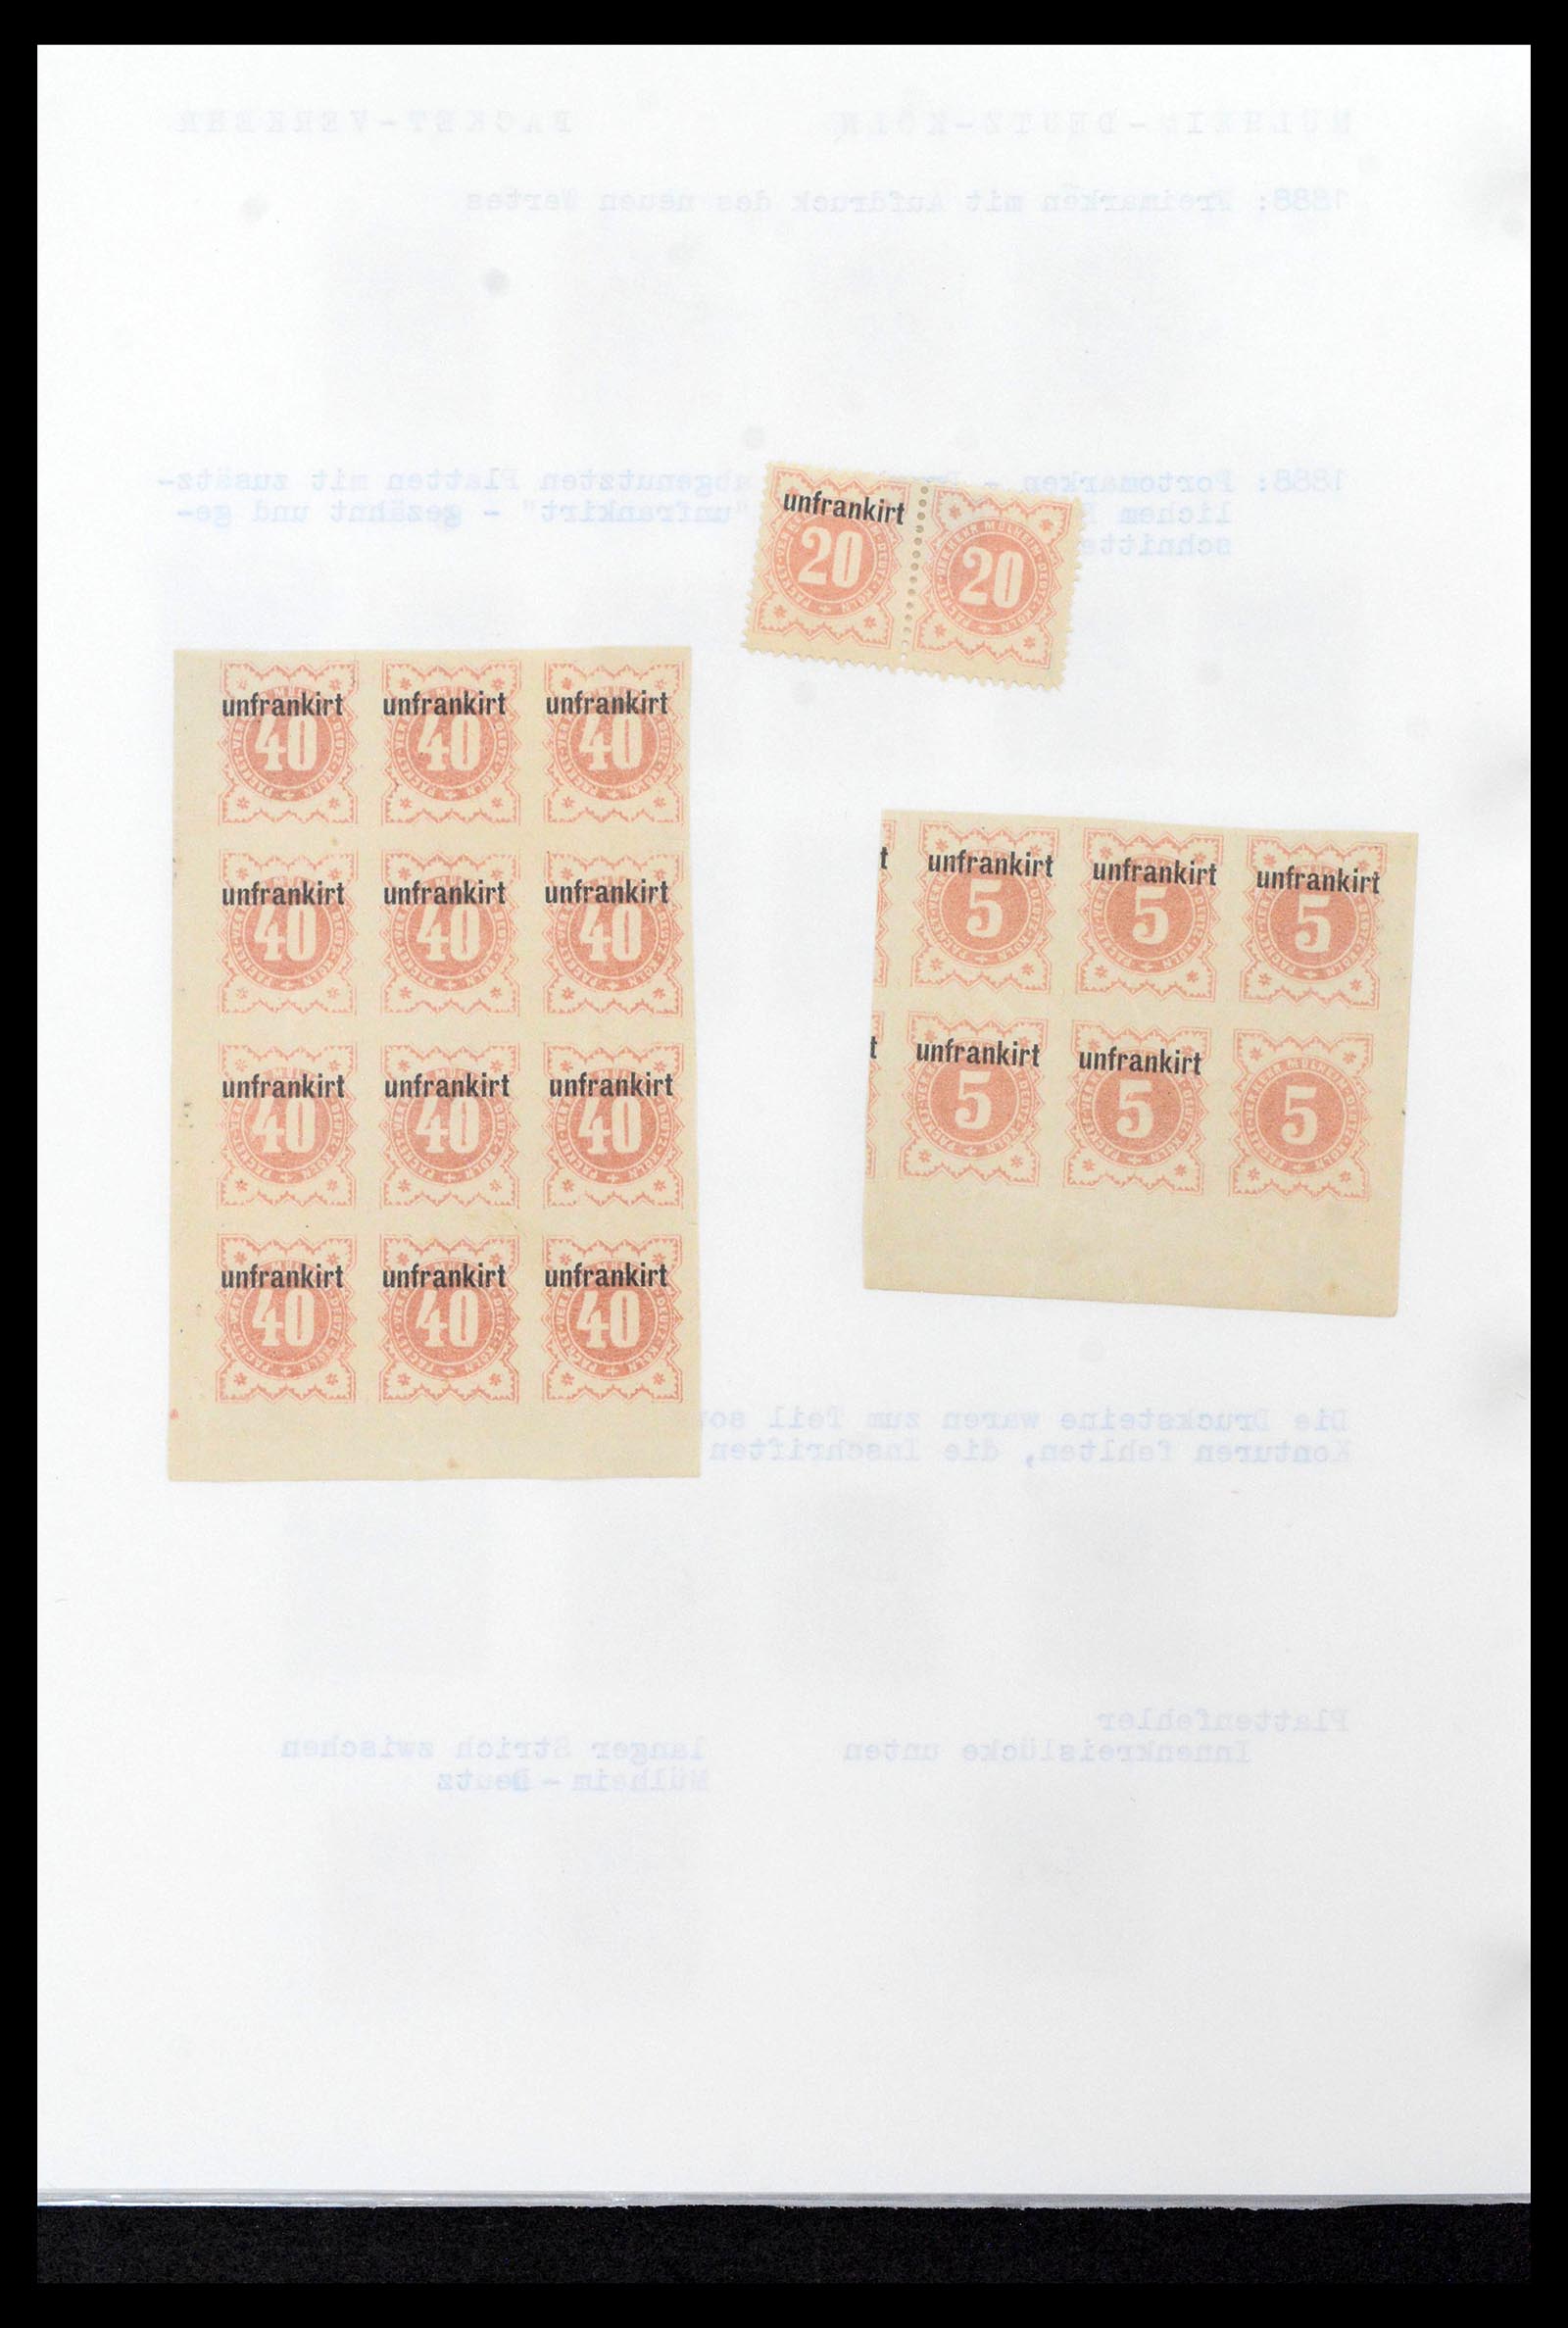 39369 0033 - Stamp collection 39369 Germany citypost 1886-1899.